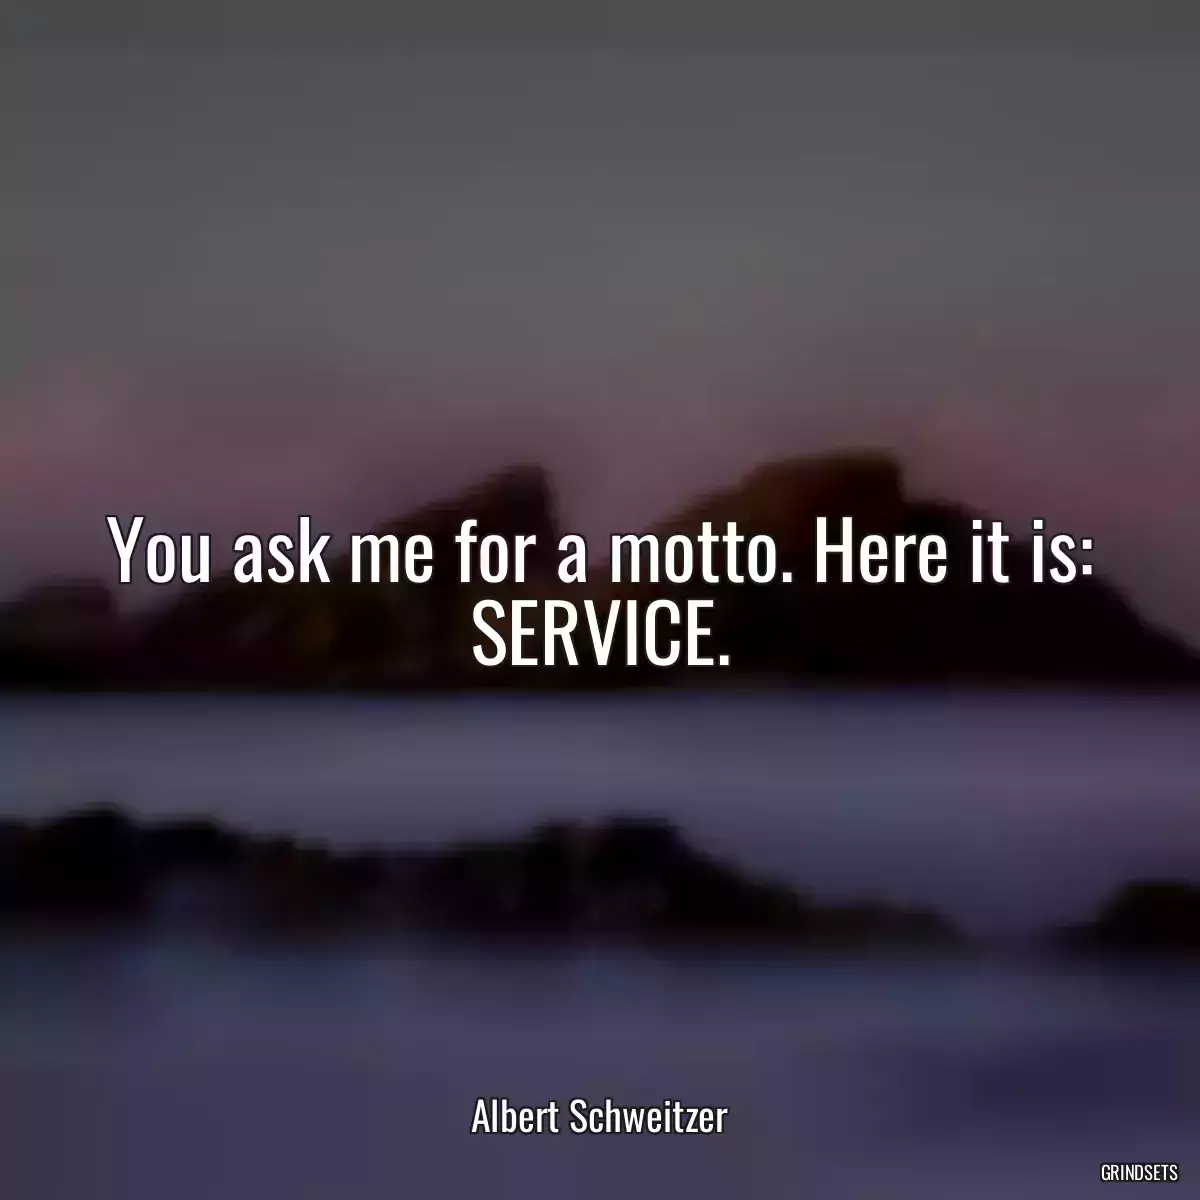 You ask me for a motto. Here it is: SERVICE.